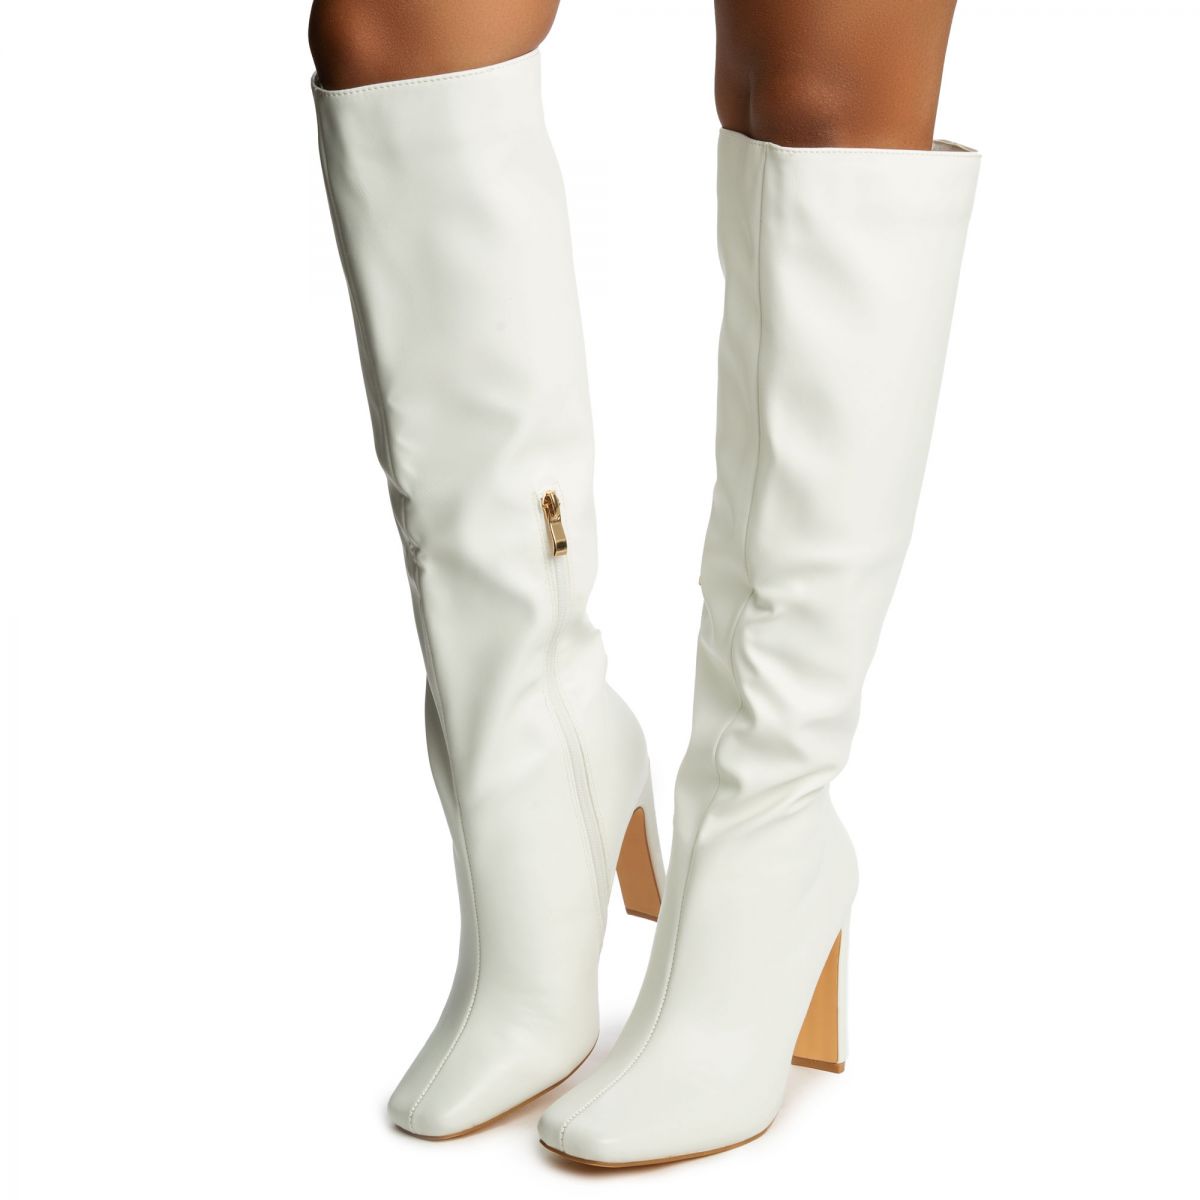 LILIANAS SHOES Tequila-1 Knee High Heel Boot TEQUILA-1-WHT - PLNDR